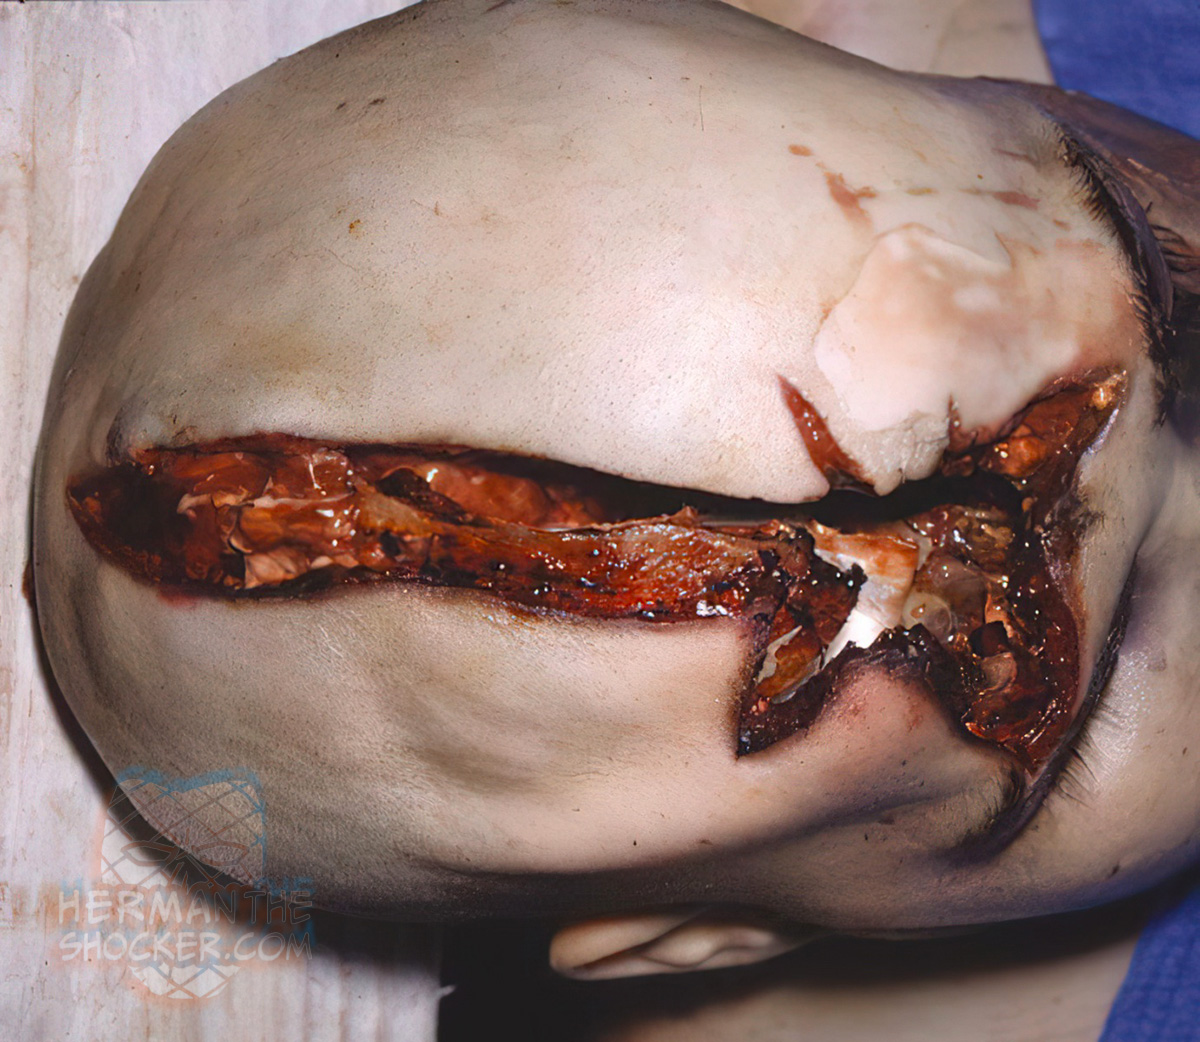 A gaping stellate wound on the forehead